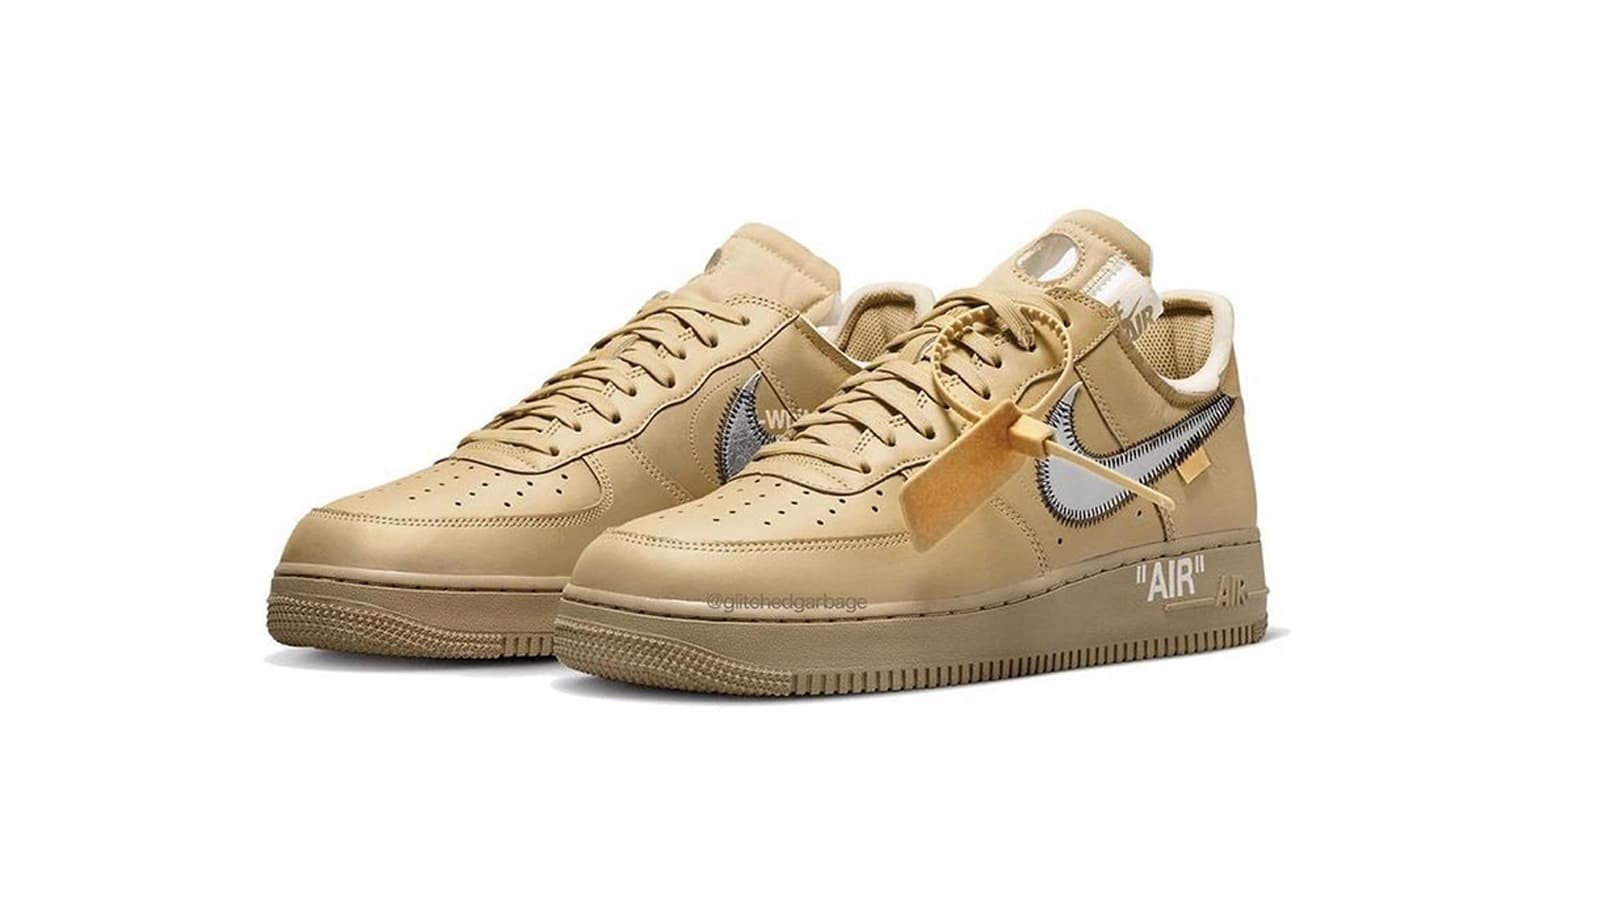 Off-White x Nike Air Force 1 Low “Desert”